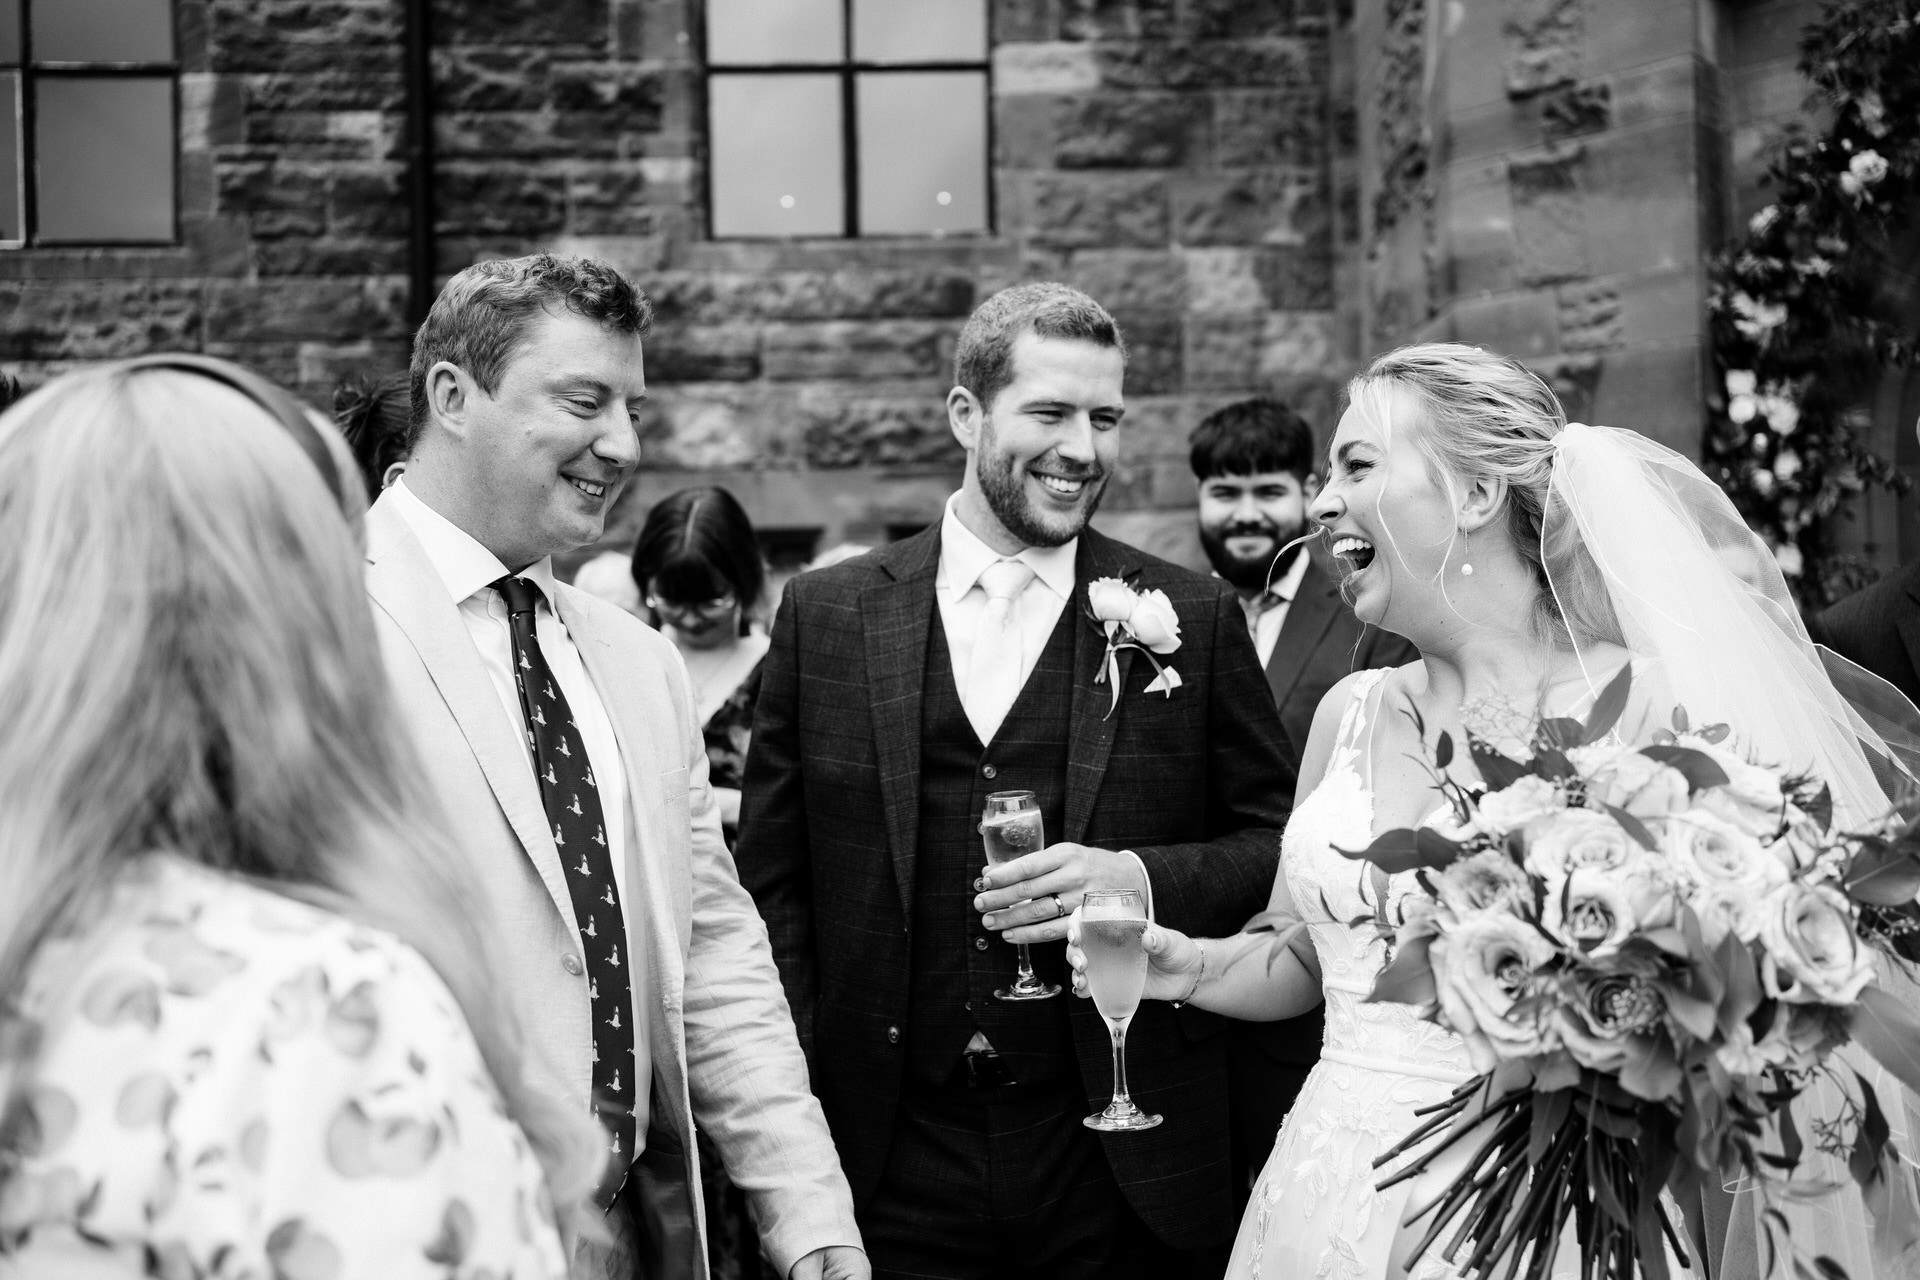 documentary wedding photograph at peckforton castle. bride and groom talk to guests